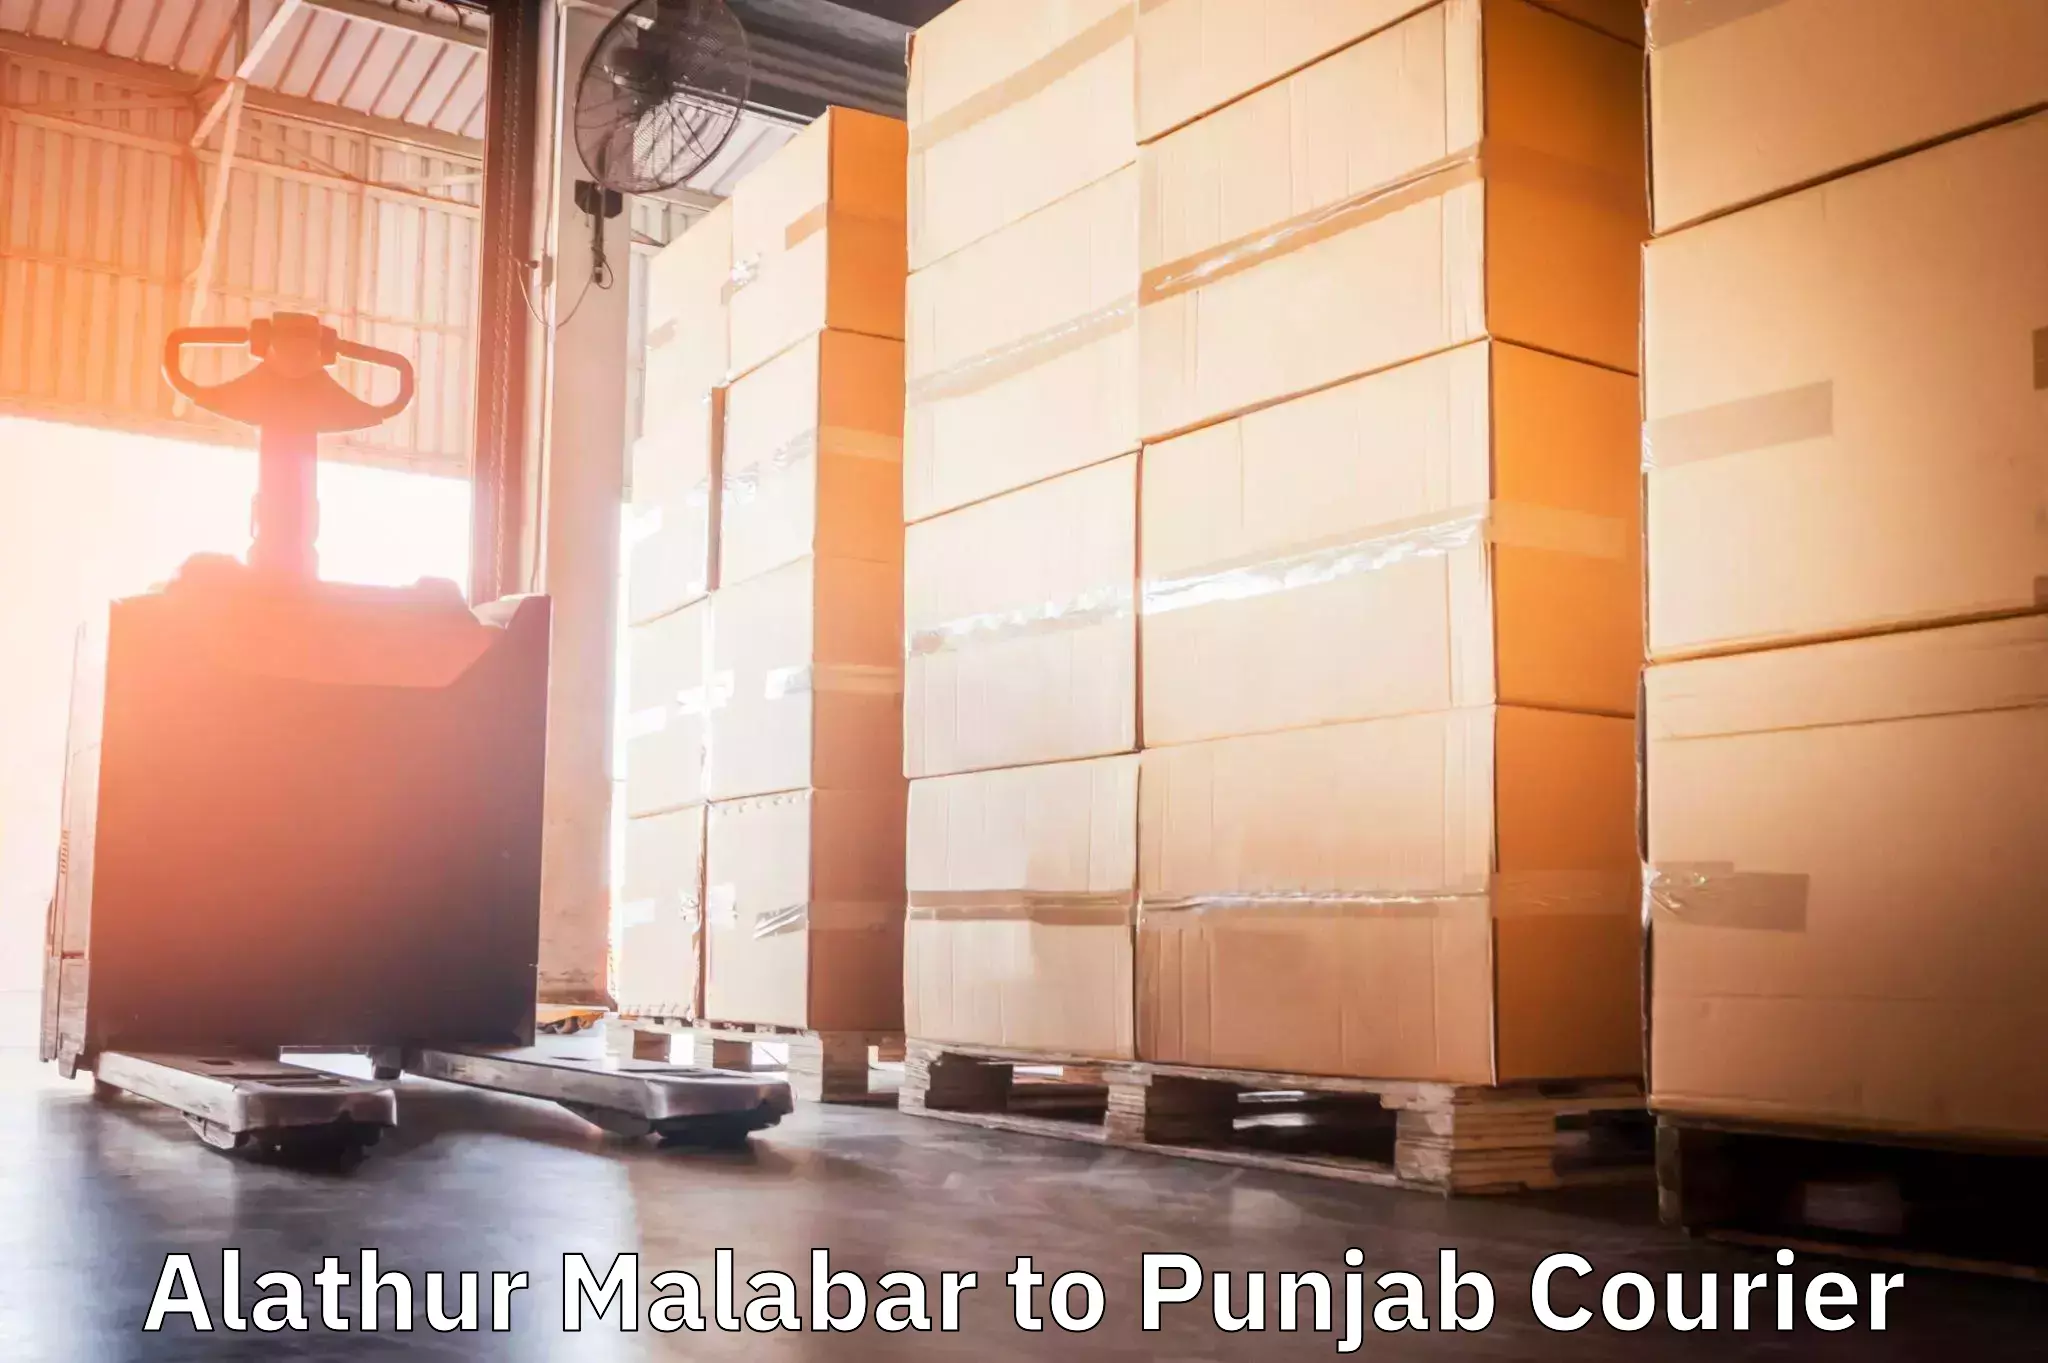 Personal courier services Alathur Malabar to Punjab